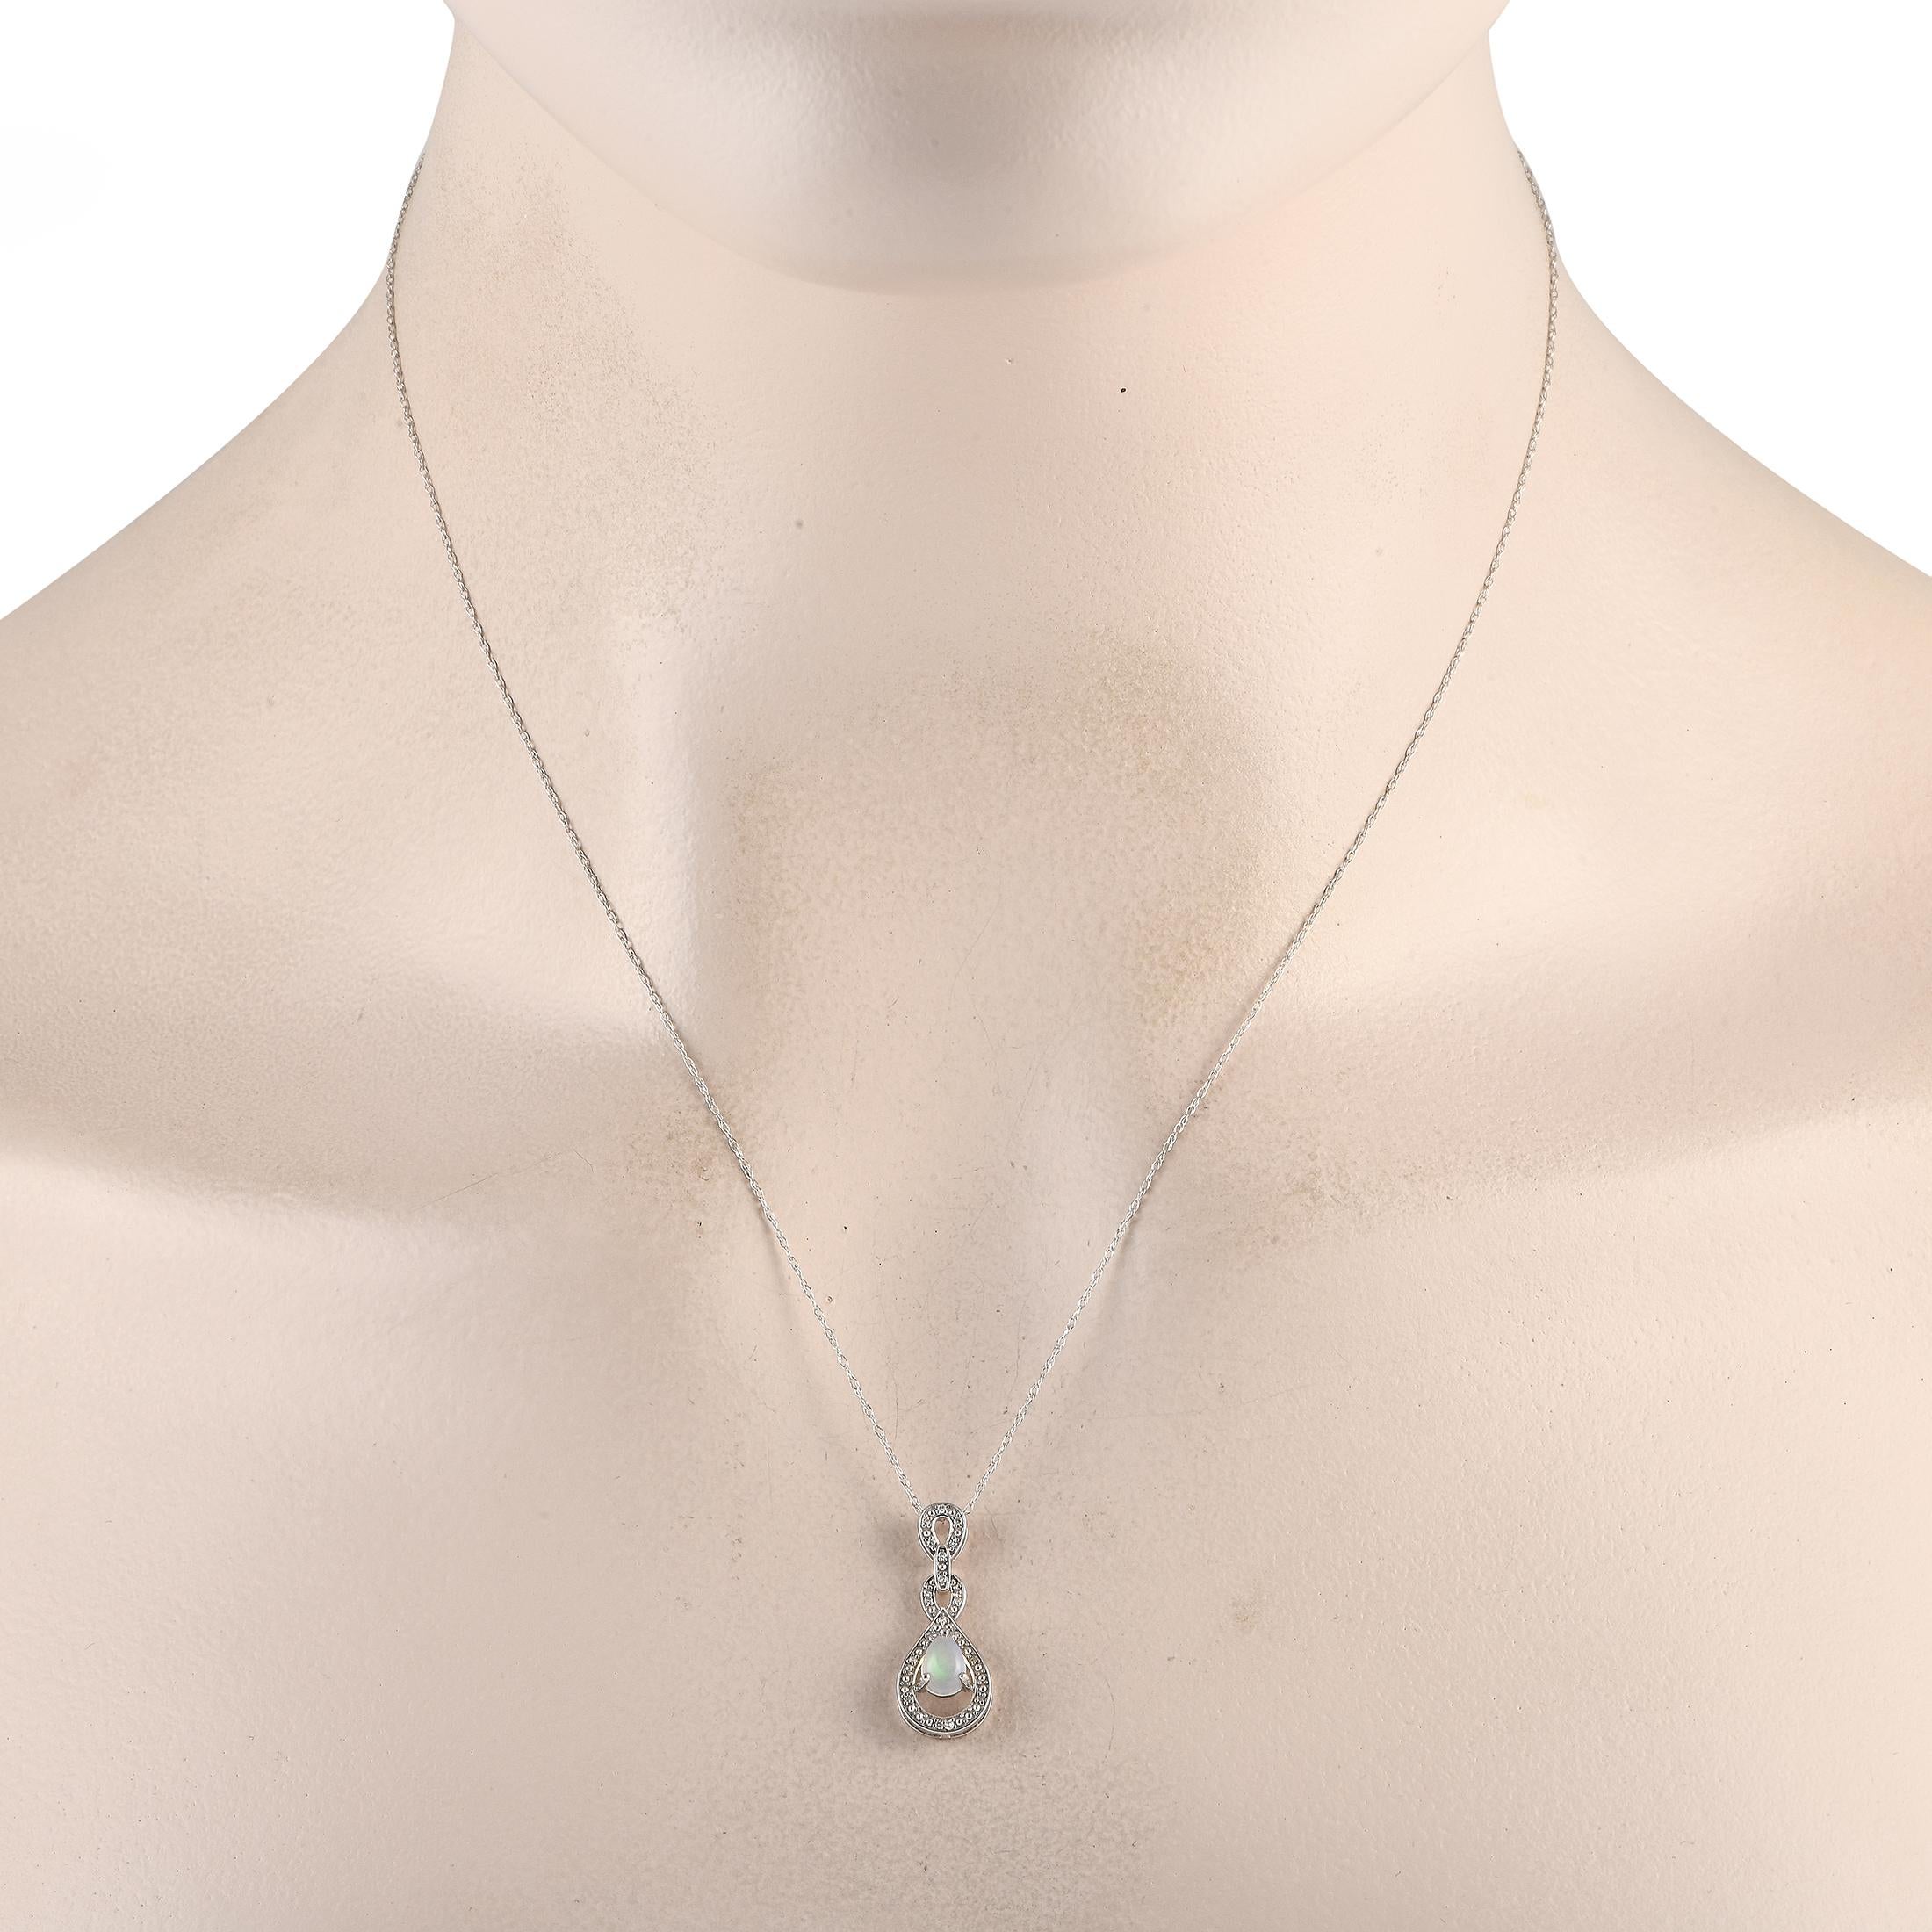 A fiery Opal center stone adds color and dimension to this elegant, understated necklace. On this pieces intricate 14K White Gold pendant  which measures 0.85 long by 0.45 wide  additional Diamond accents totaling 0.08 carats provide the perfect